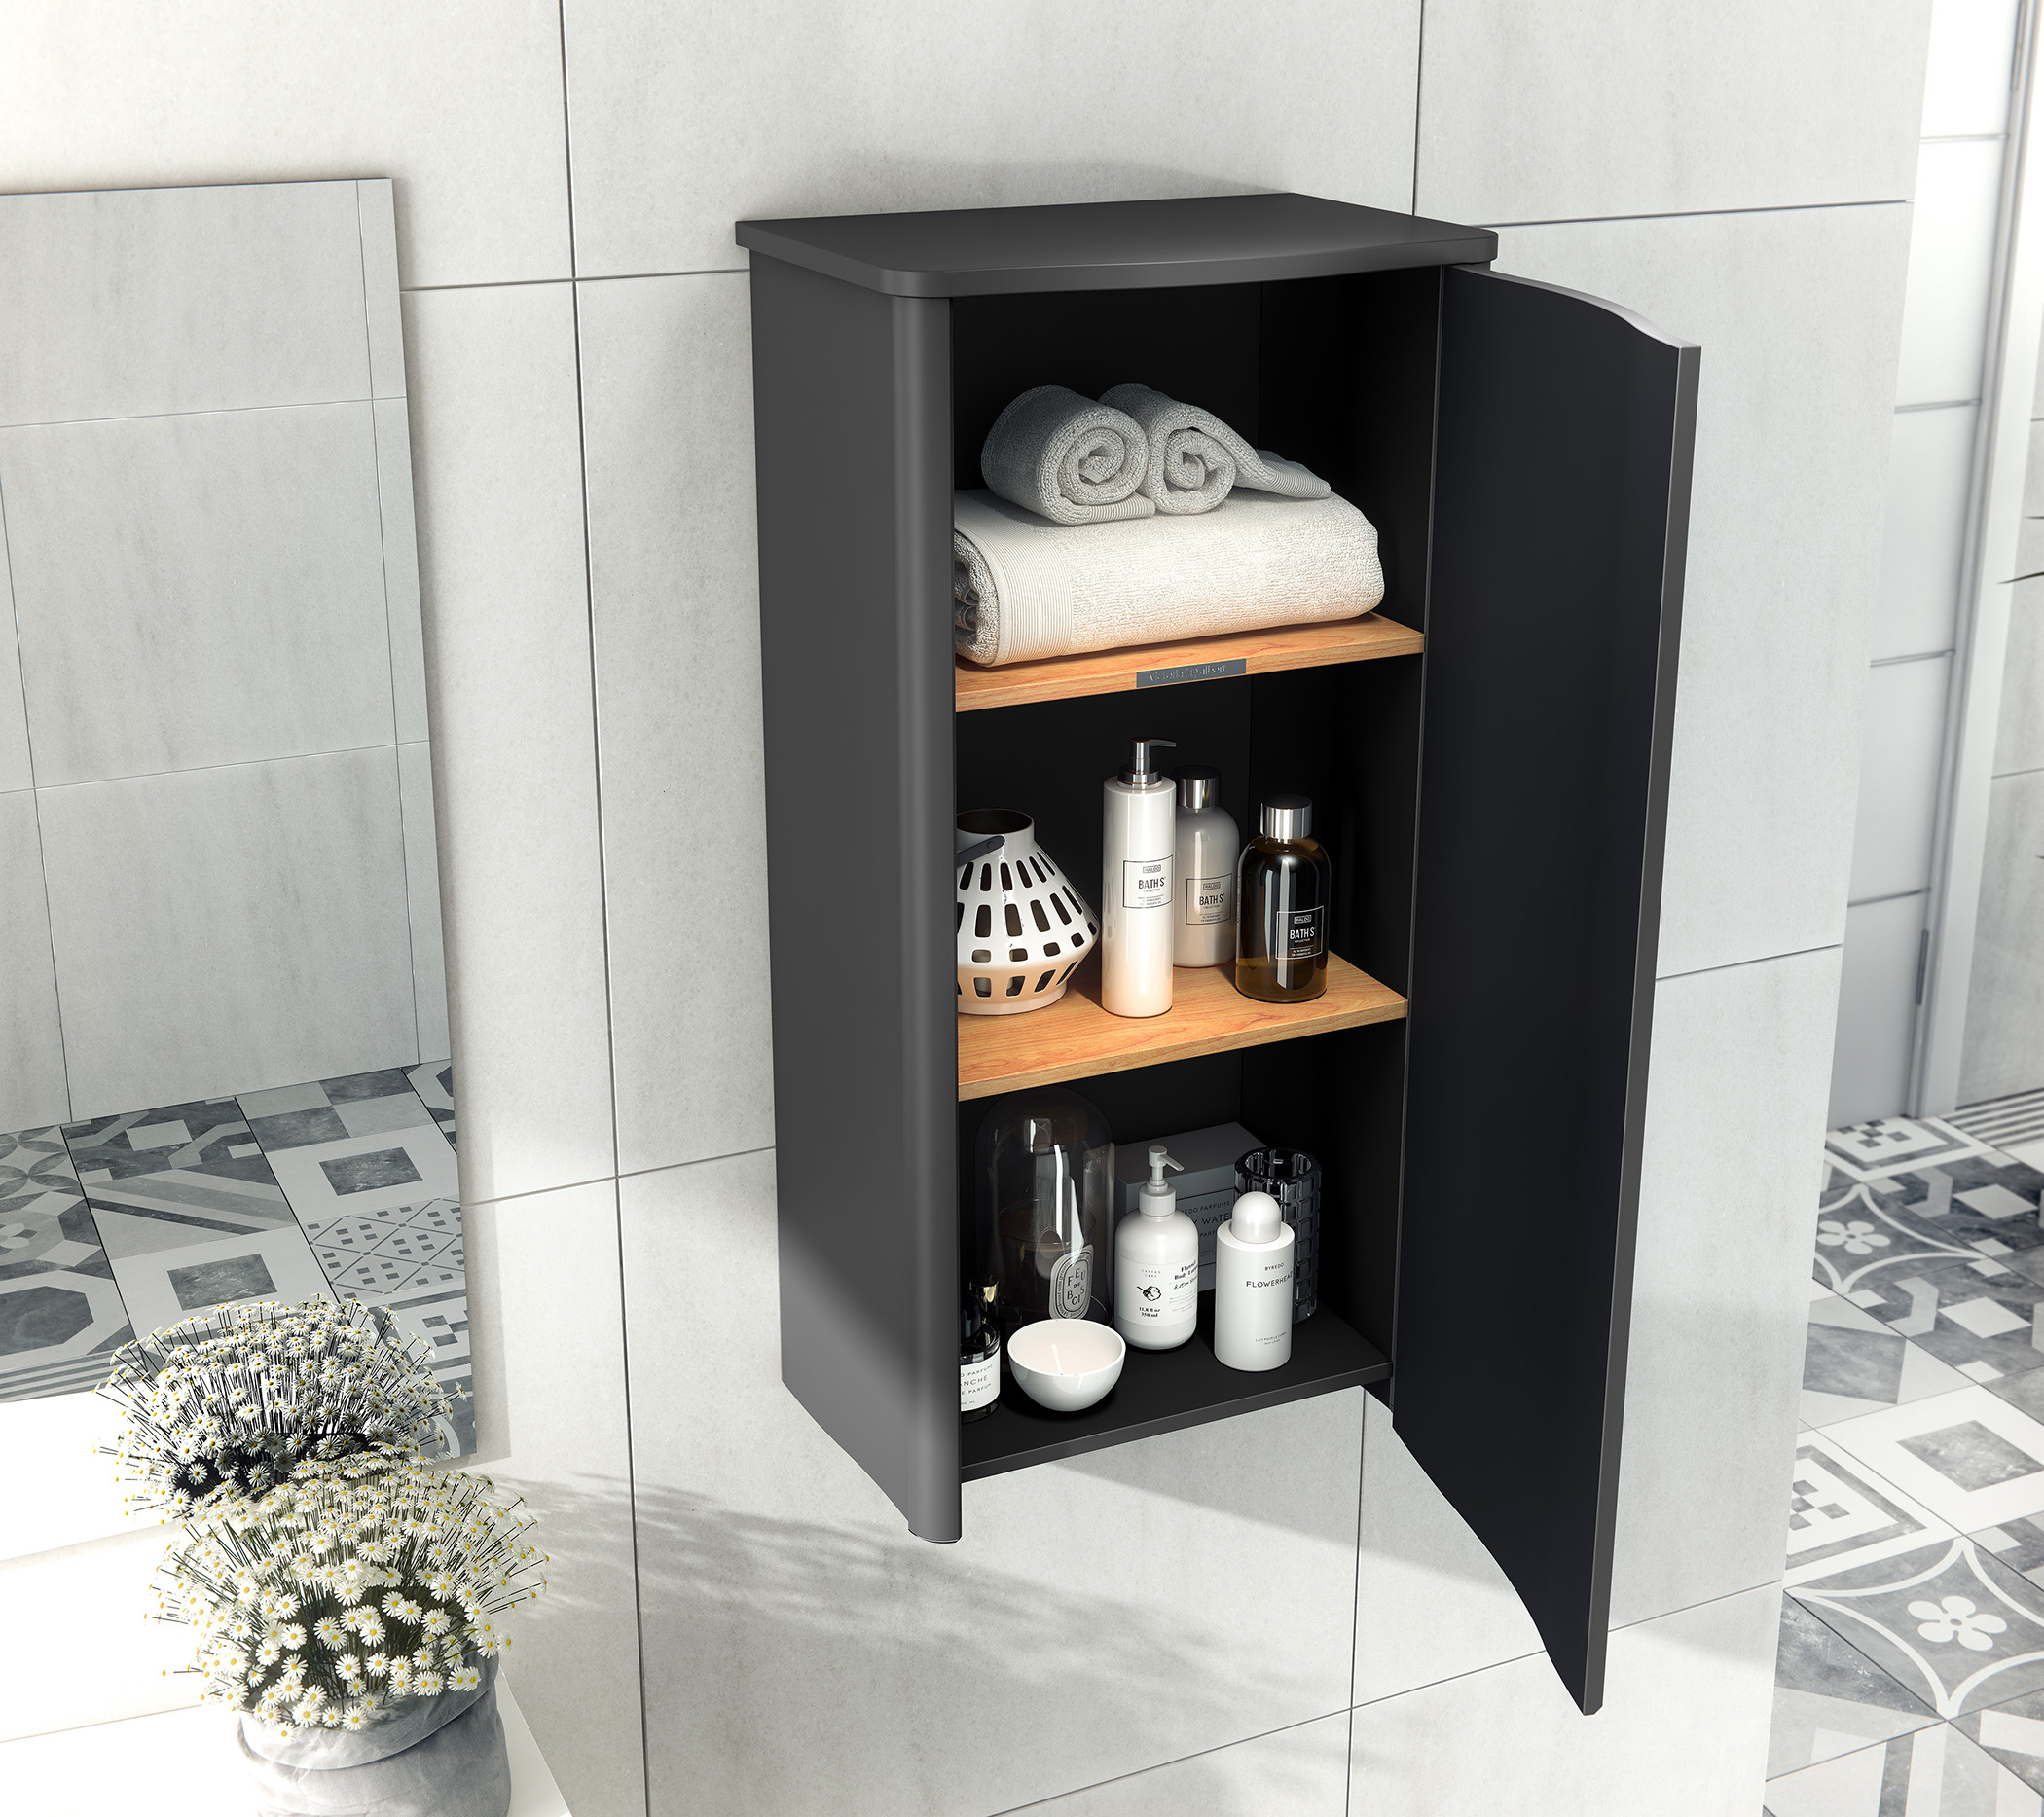 Victoria + Albert Introduces Storage for Small Bathrooms | Residential ...